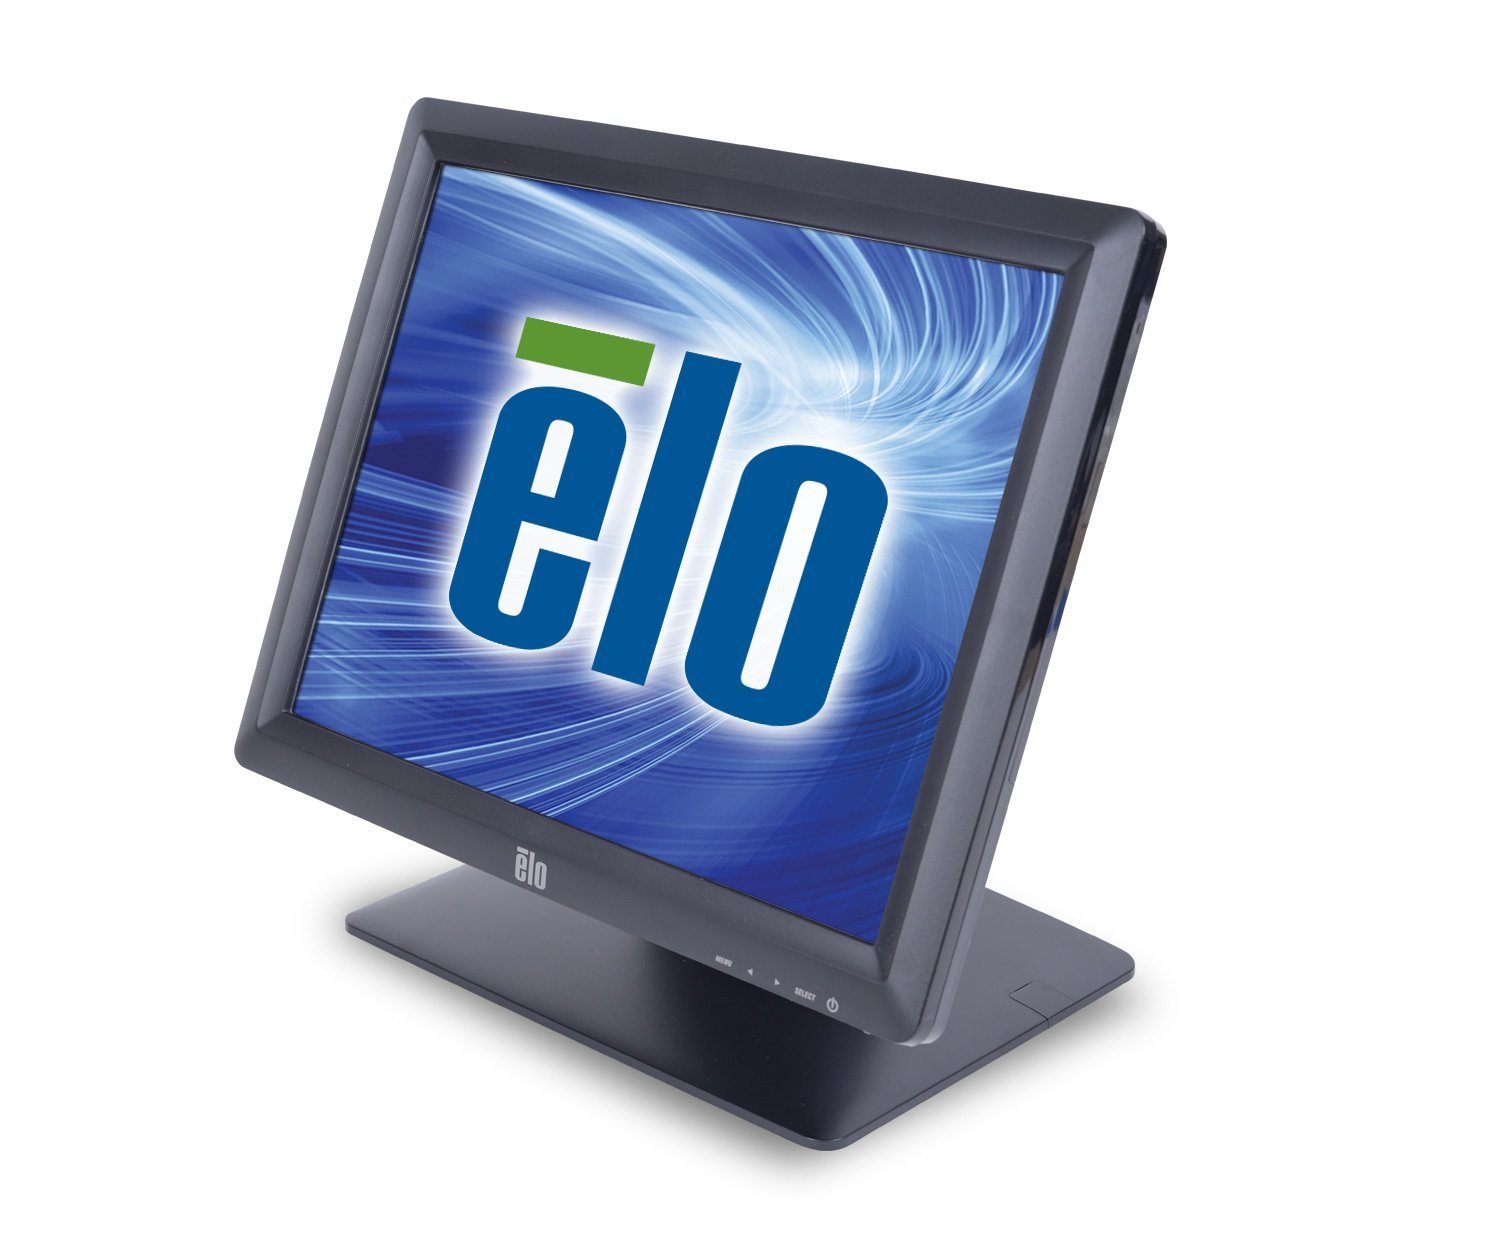 Elo Desktop Touchmonitore 1517L AccuTouch – 15-Zoll-Touchscreen-LED-Monitor